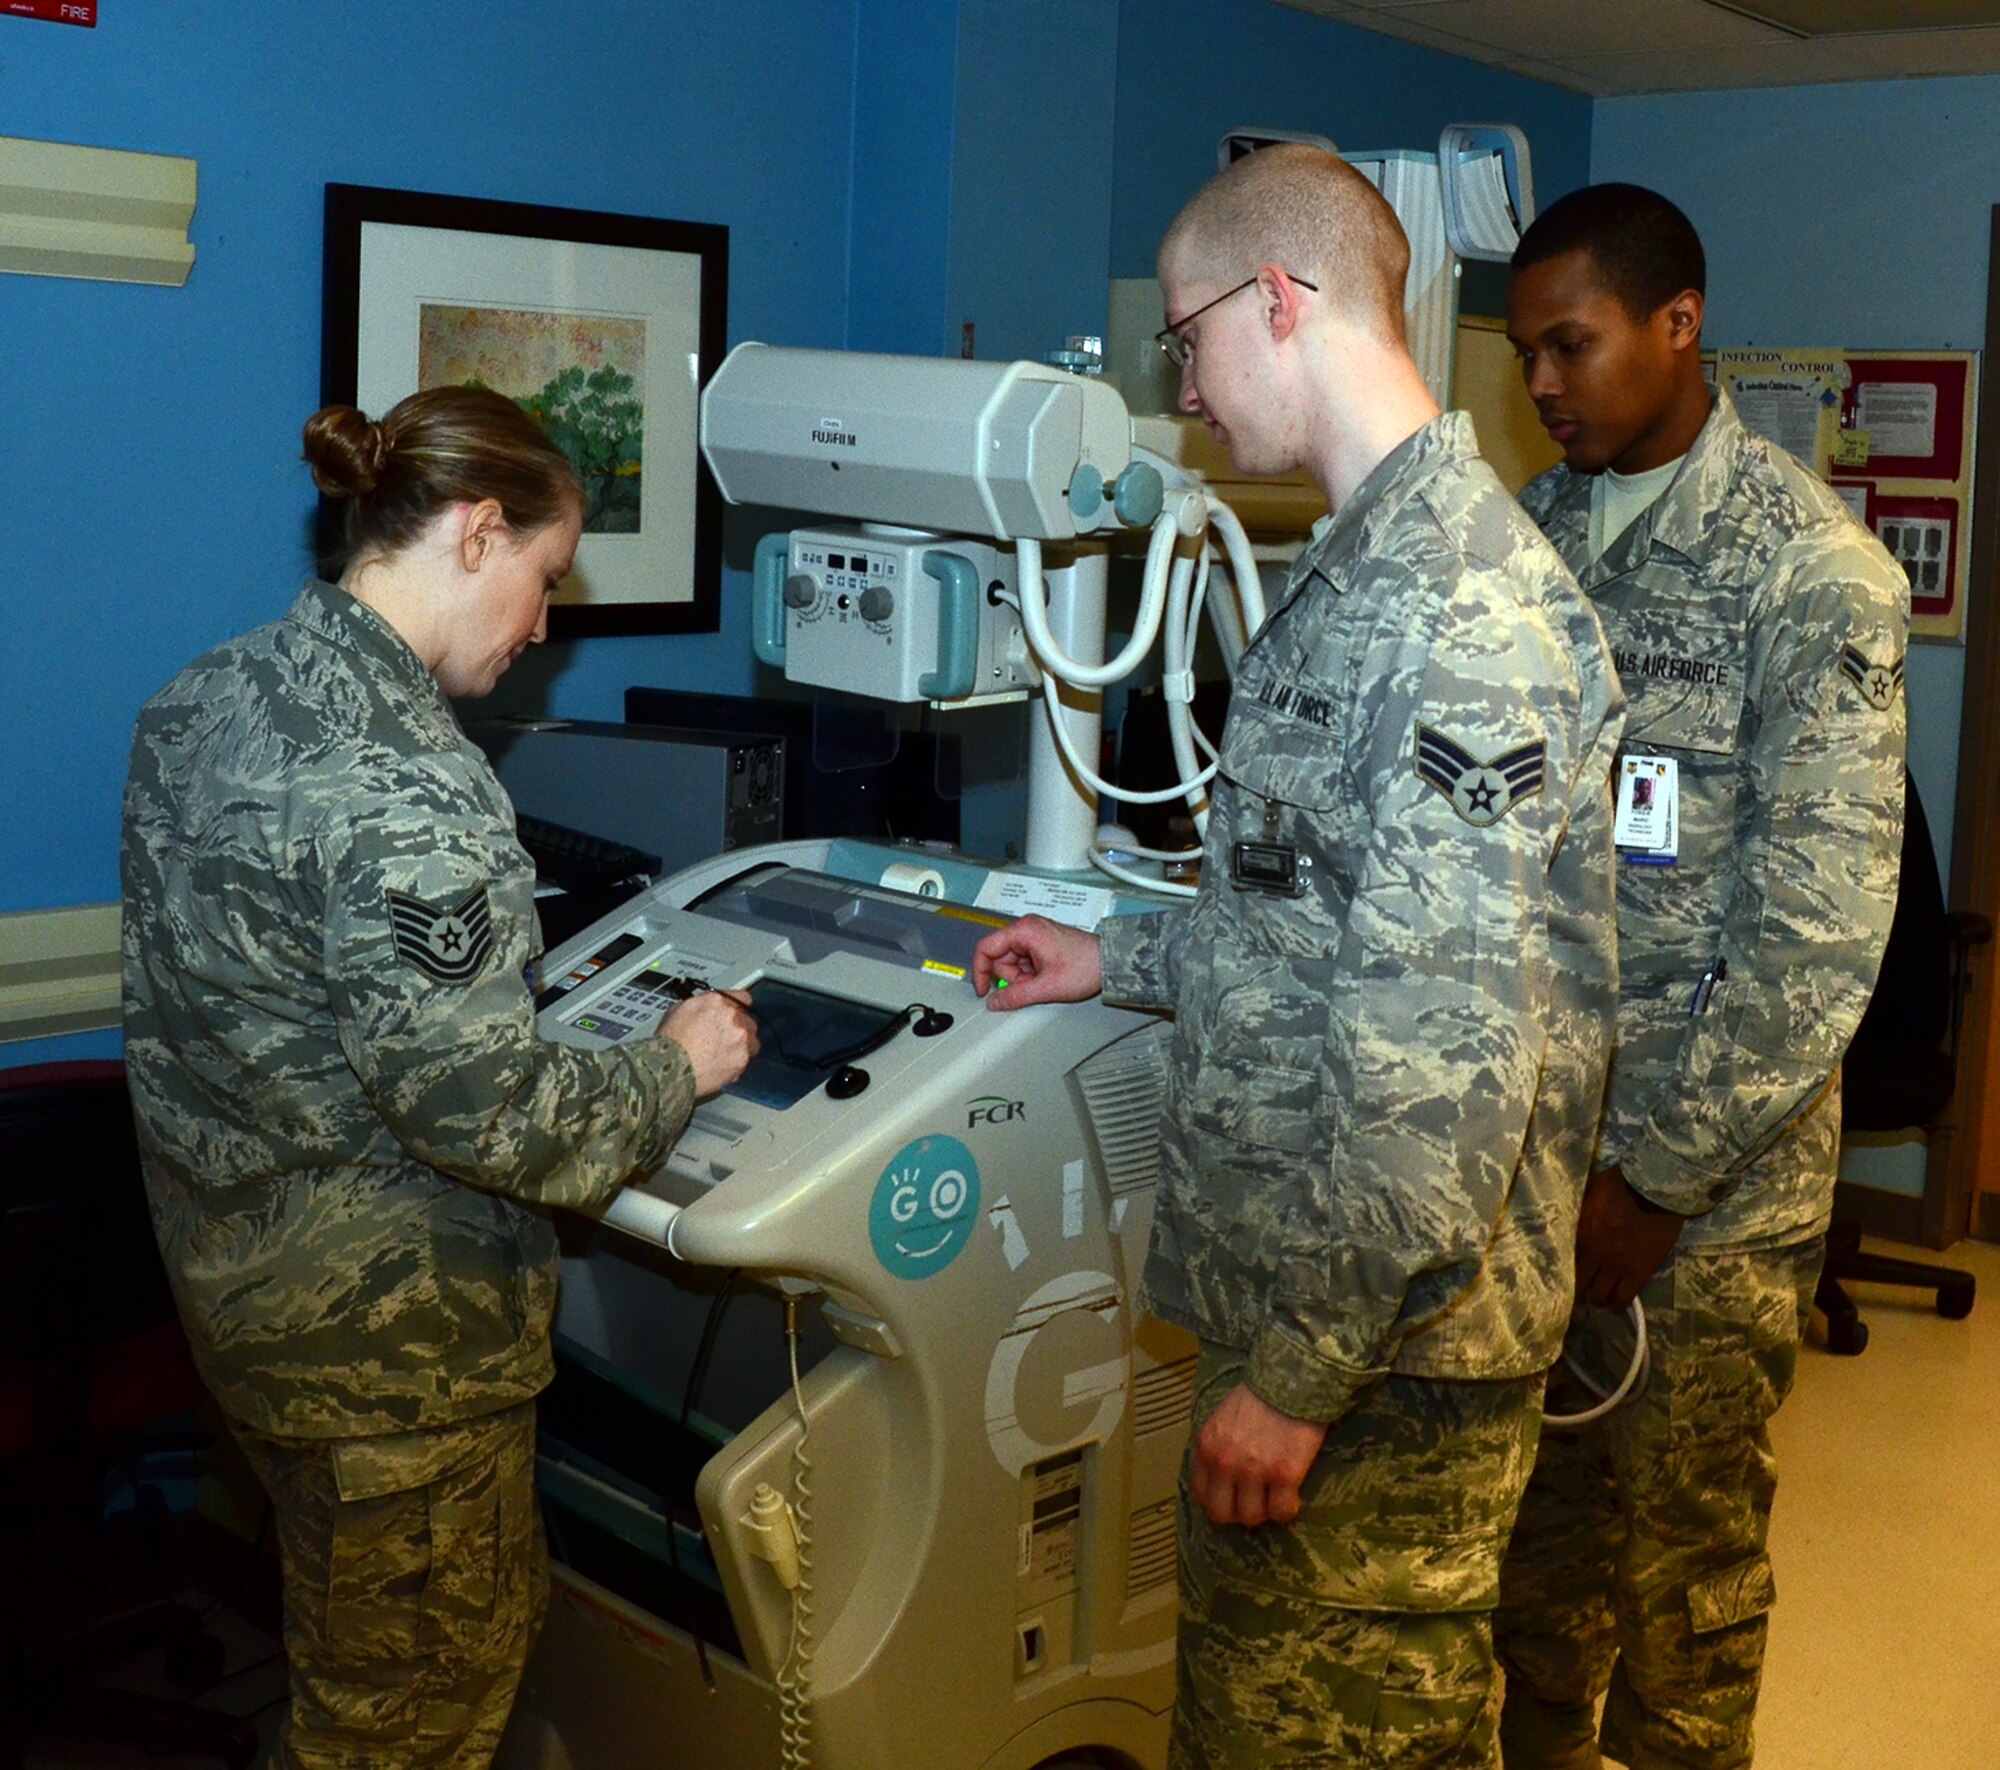 WRIGHT-PATTERSON AIR FORCE BASE, Ohio - Tech.  Sgt. Ashby Jakober, 445th Aeromedical Staging Squadron radiology technician and on the job training monitor, reviews an X-ray as Senior Airman Andrew Holby and Airman 1st Class Mario Fosque, both 88th Medical Group radiology technicians observe during training April 15 at the Wright-Patterson Medical Center. Twenty-two ASTS Airmen conducted their annual tour April 6 – 20 at the WPAFB Medical Center where they received training in job classification skills, sustainment and readiness skills in various departments to include the laboratory, pharmacy, nursing, medical administration, surgical technology and radiology. (U.S. Air Force photo/Lt. Col. Cynthia Harris)